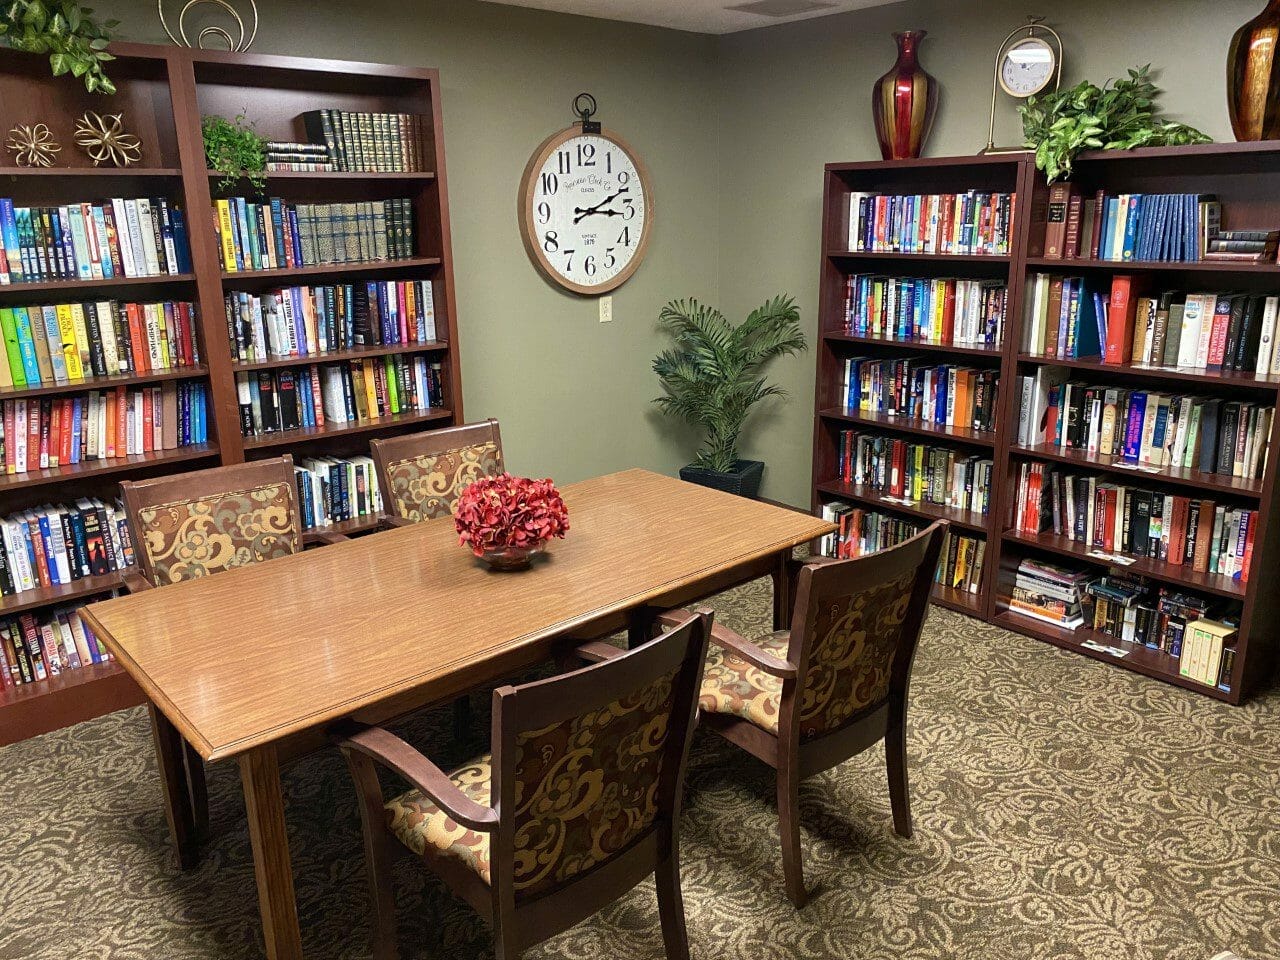 <span  class="uc_style_uc_tiles_grid_image_elementor_uc_items_attribute_title" style="color:#000000;">American Village Assisted Living library interior </span>